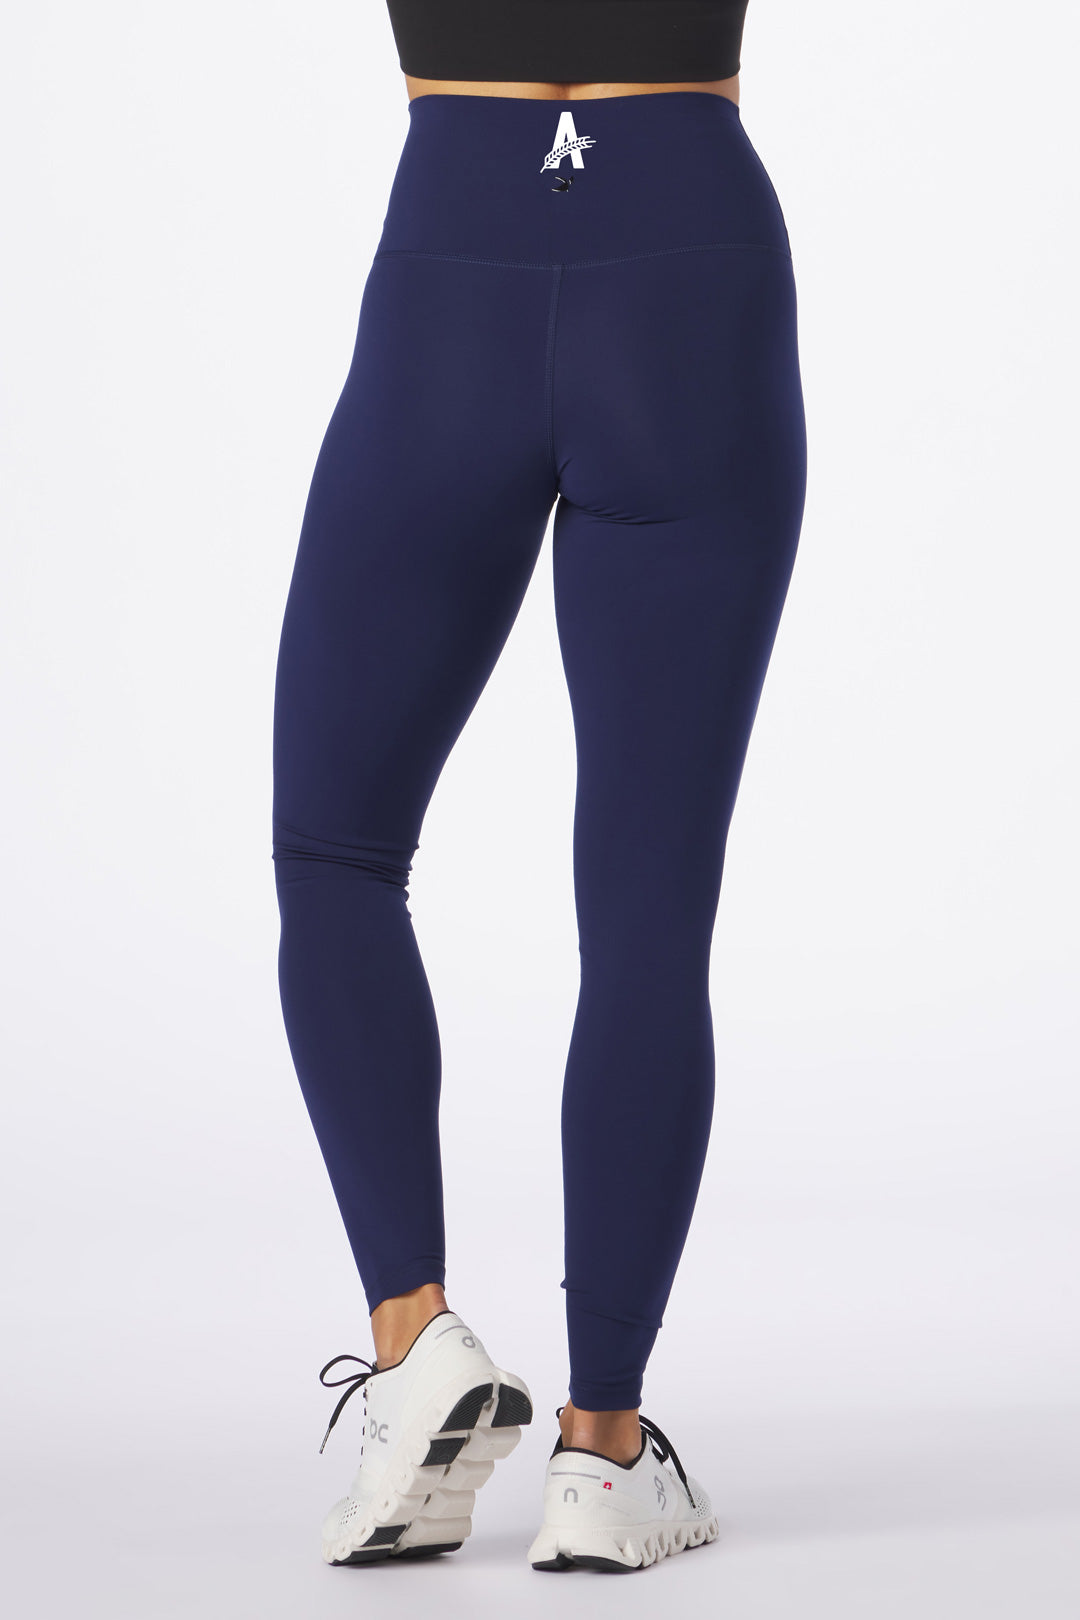 Cropped Workout Leggings Seamless Mesh Panel Athletic Tights | SHEIN IN